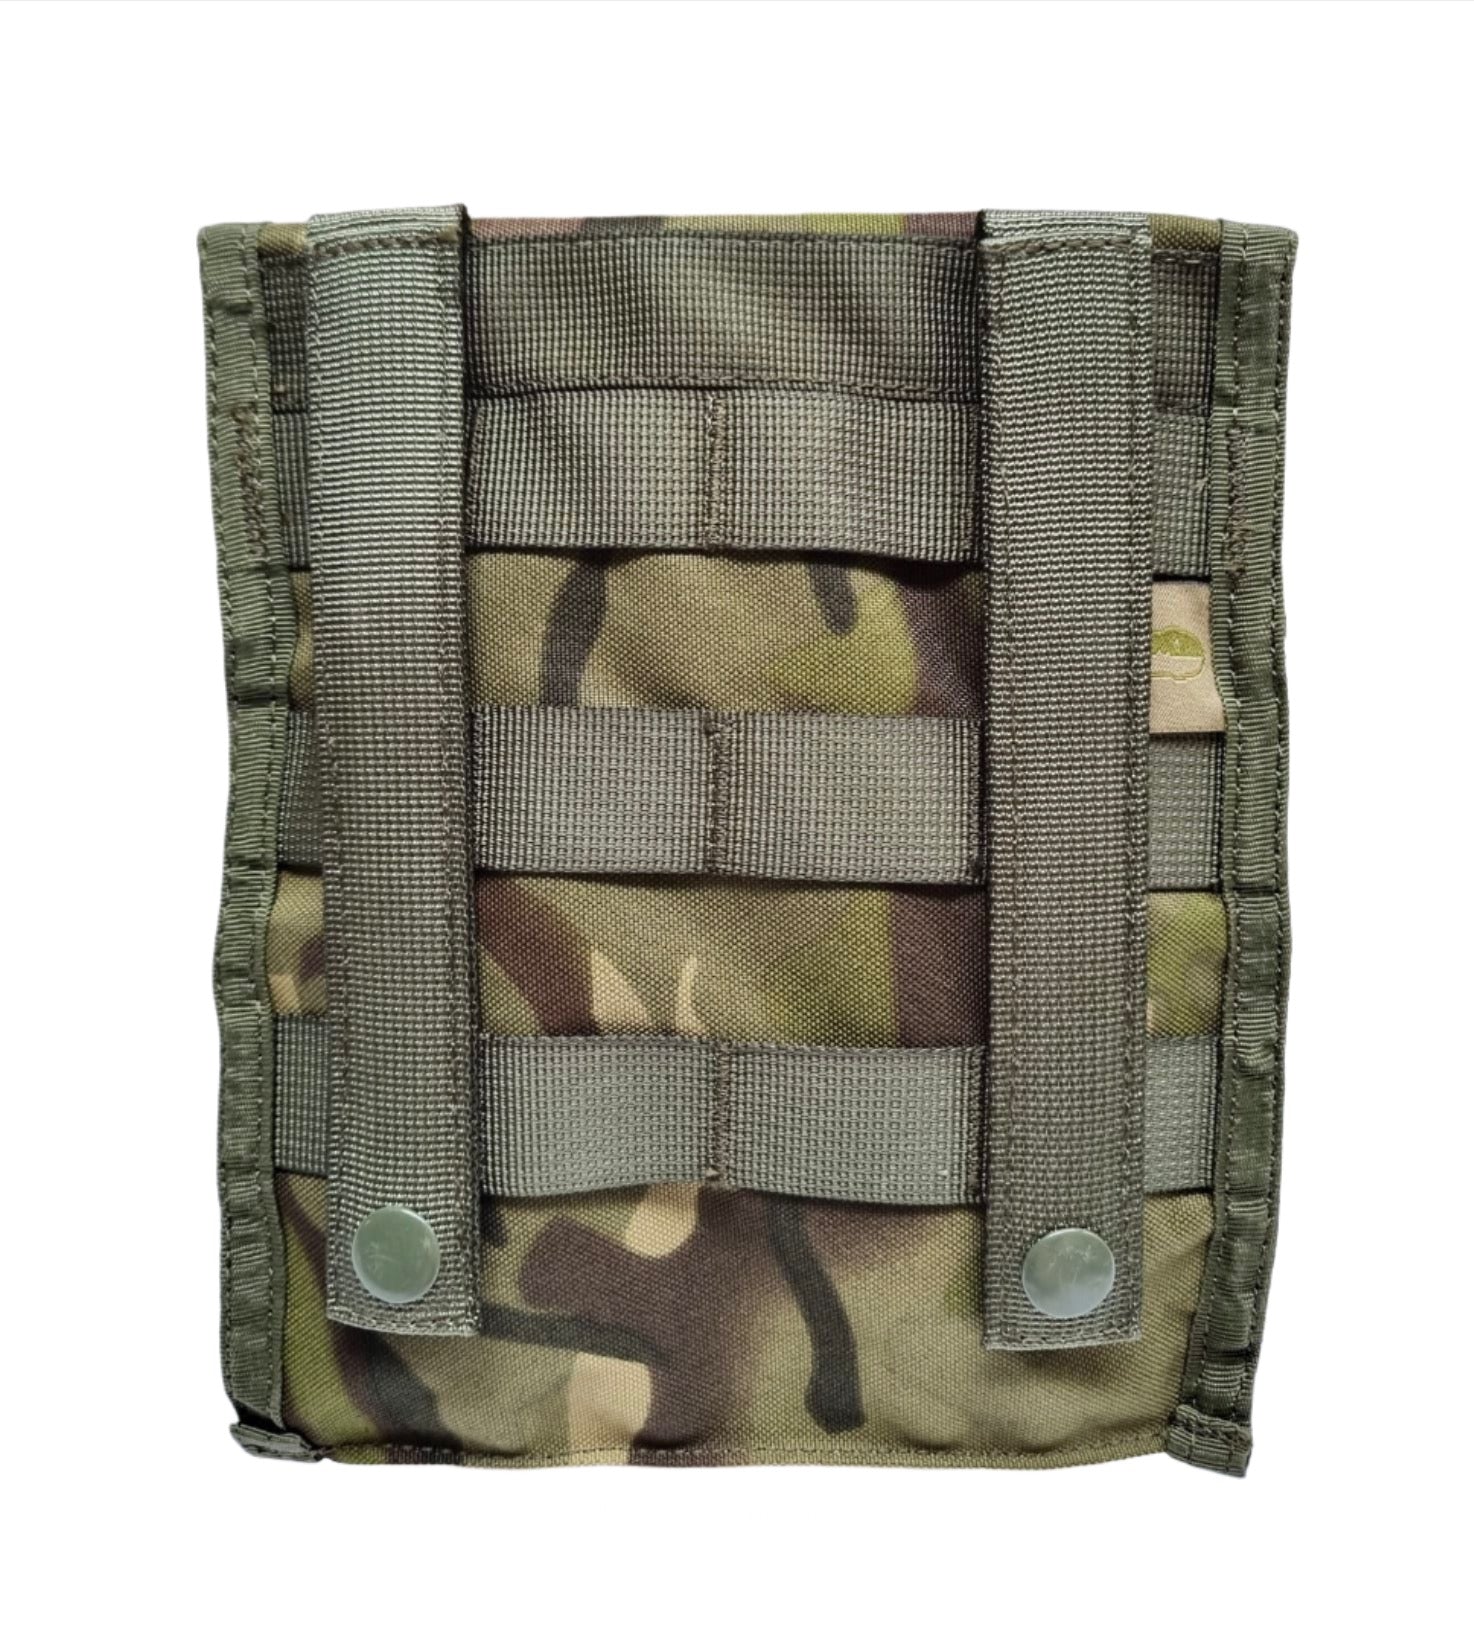 Shadow Strategic Camouflage LMG / SAW Pouch Color Multicam Green backside view.